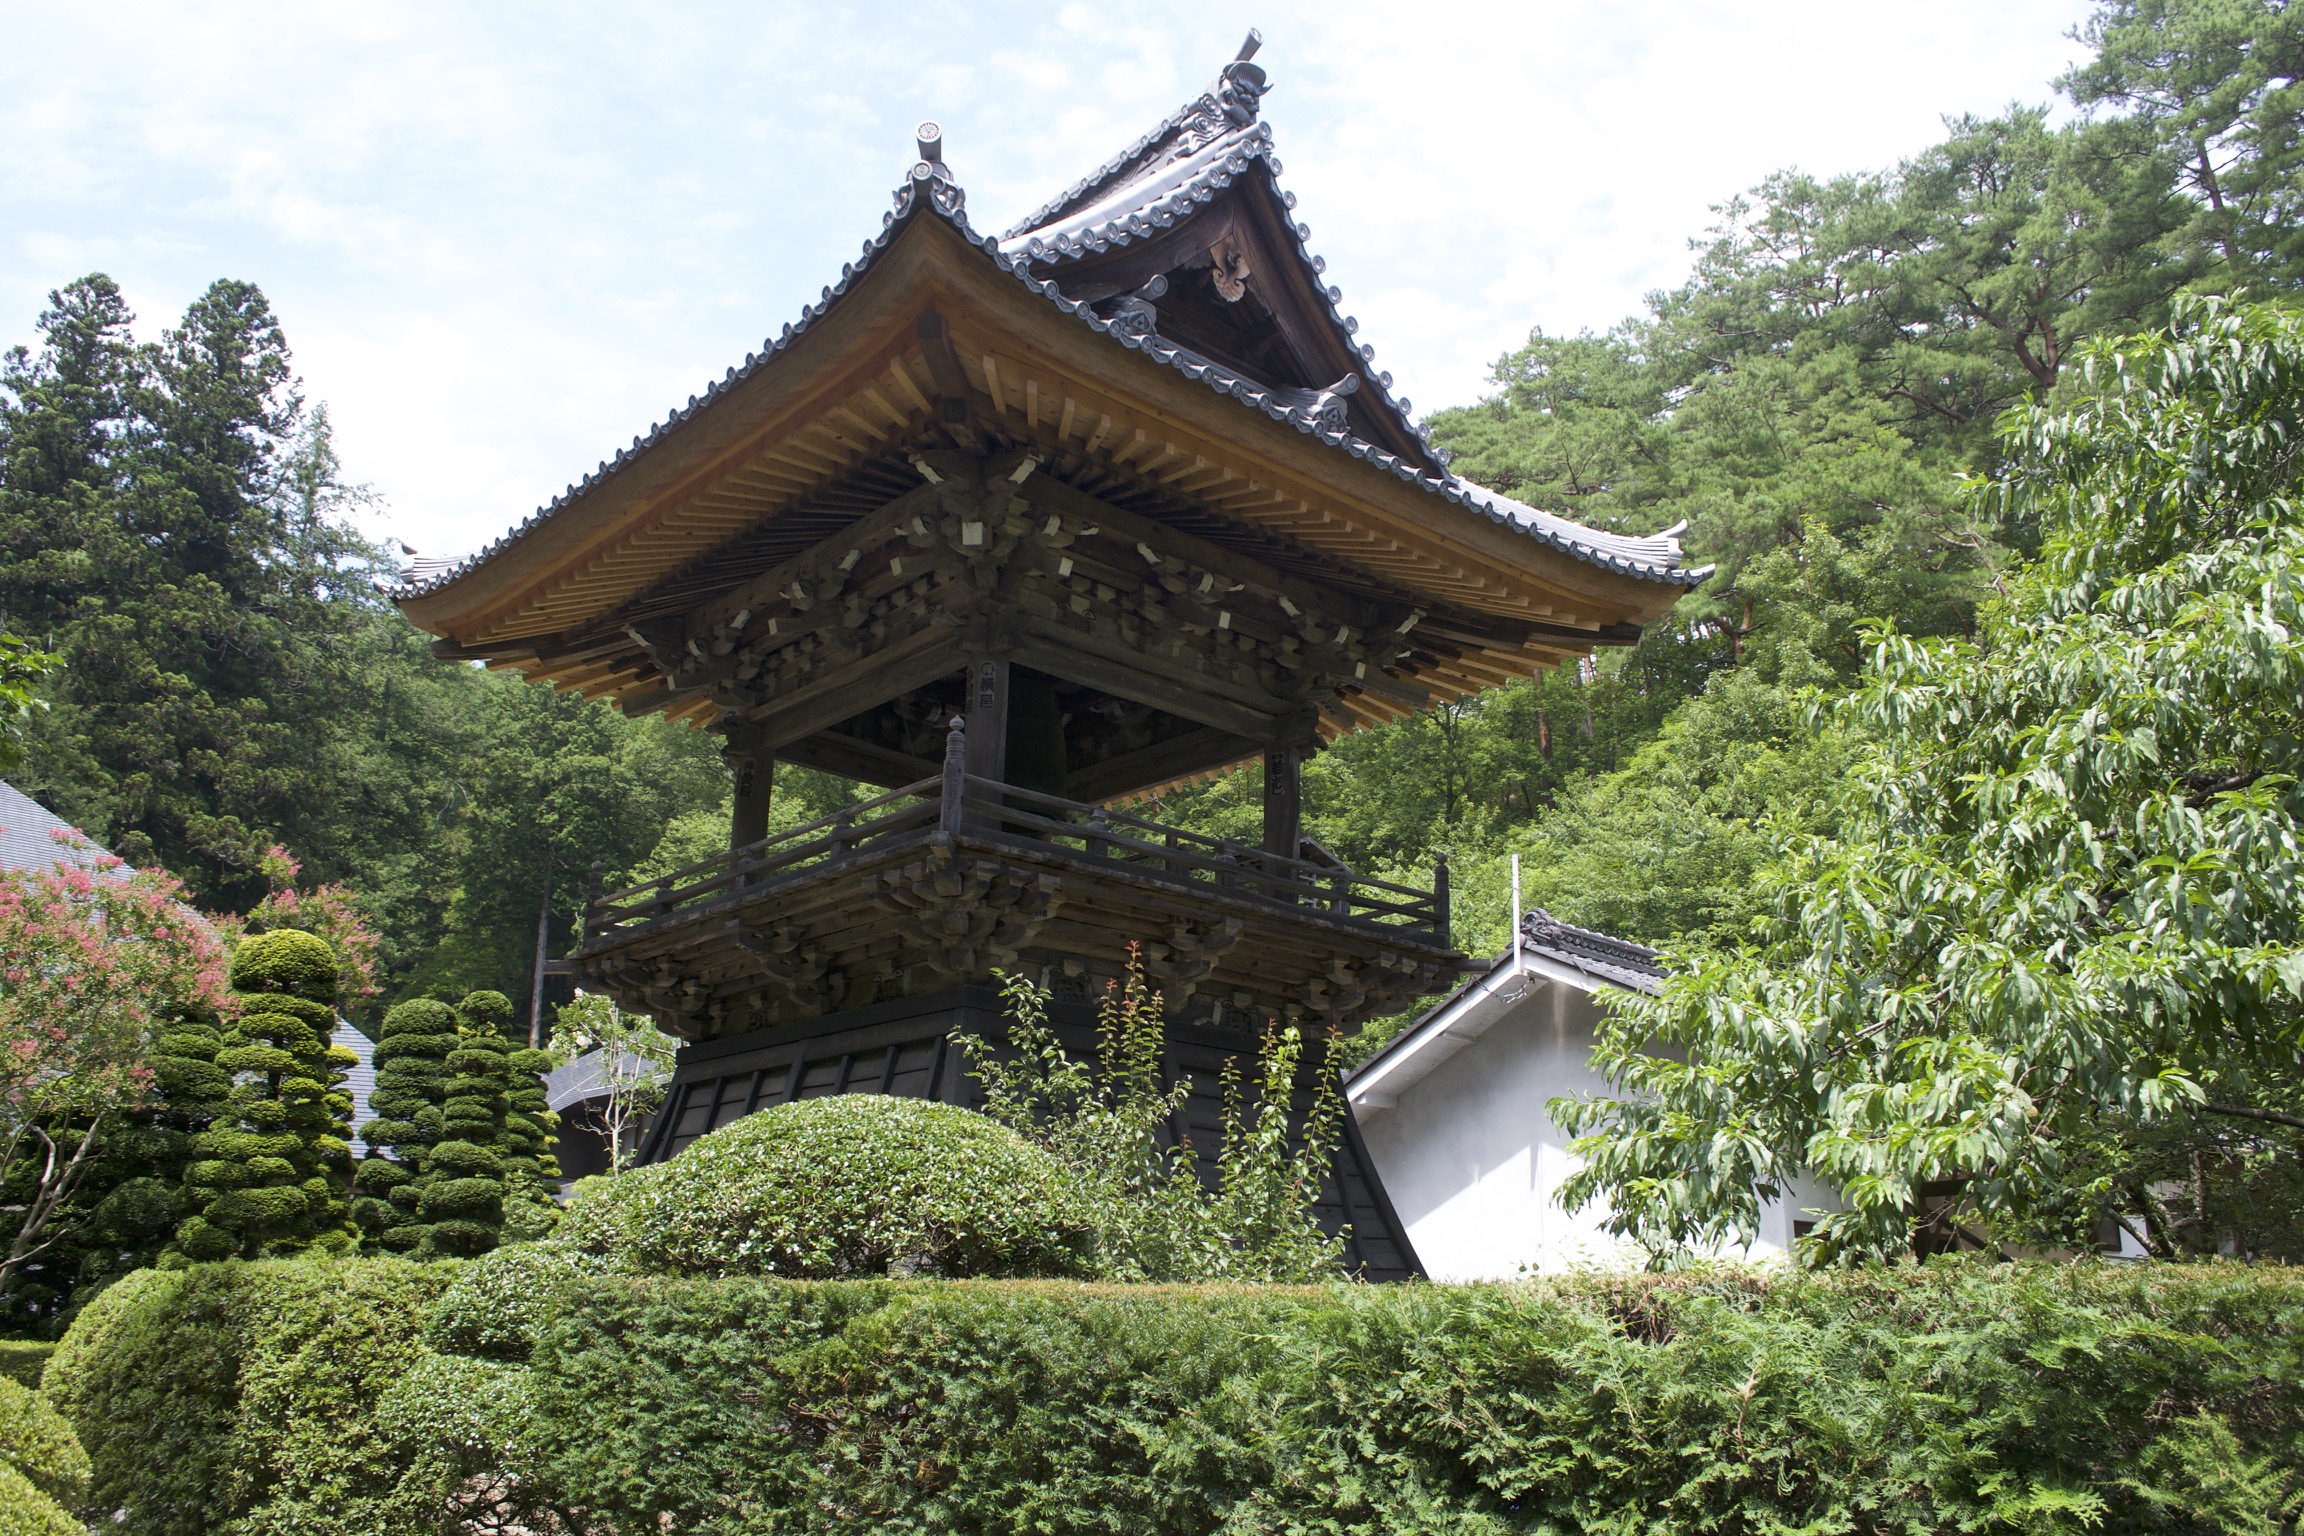 An elevated single-tiered open pagoda.